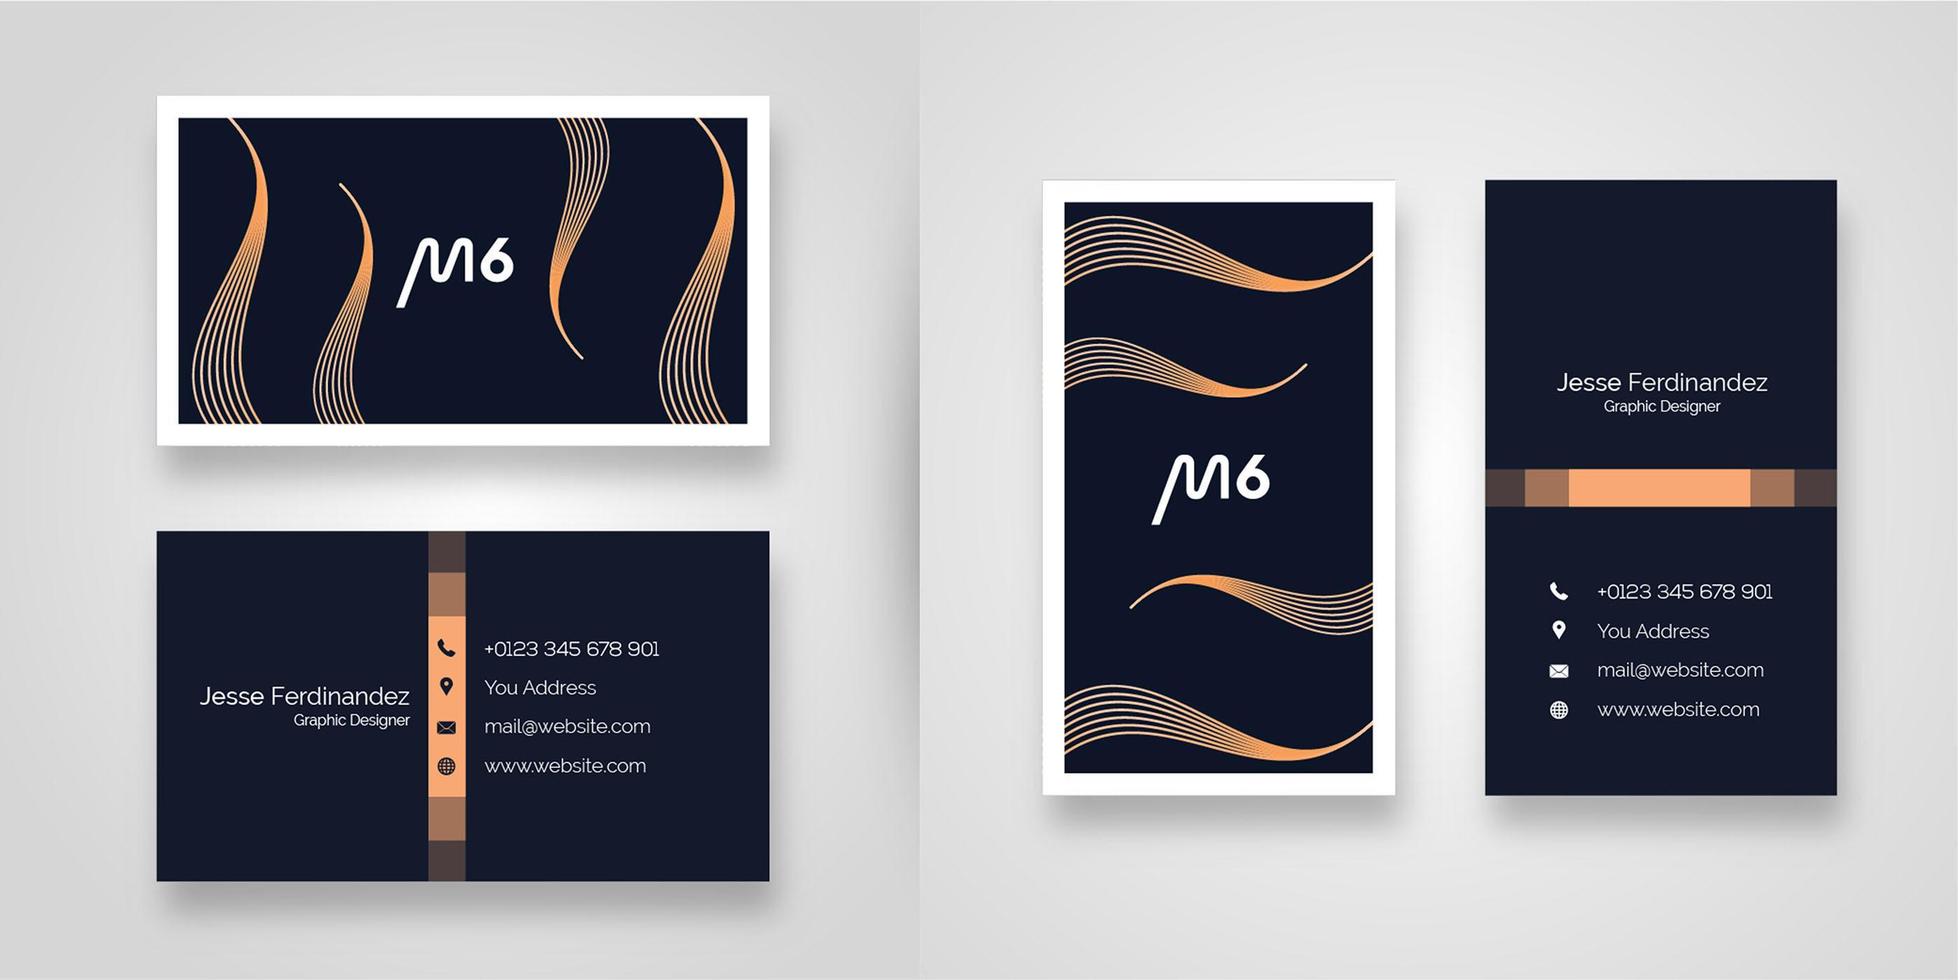 Abstract Dark Theme Business Card Template vector